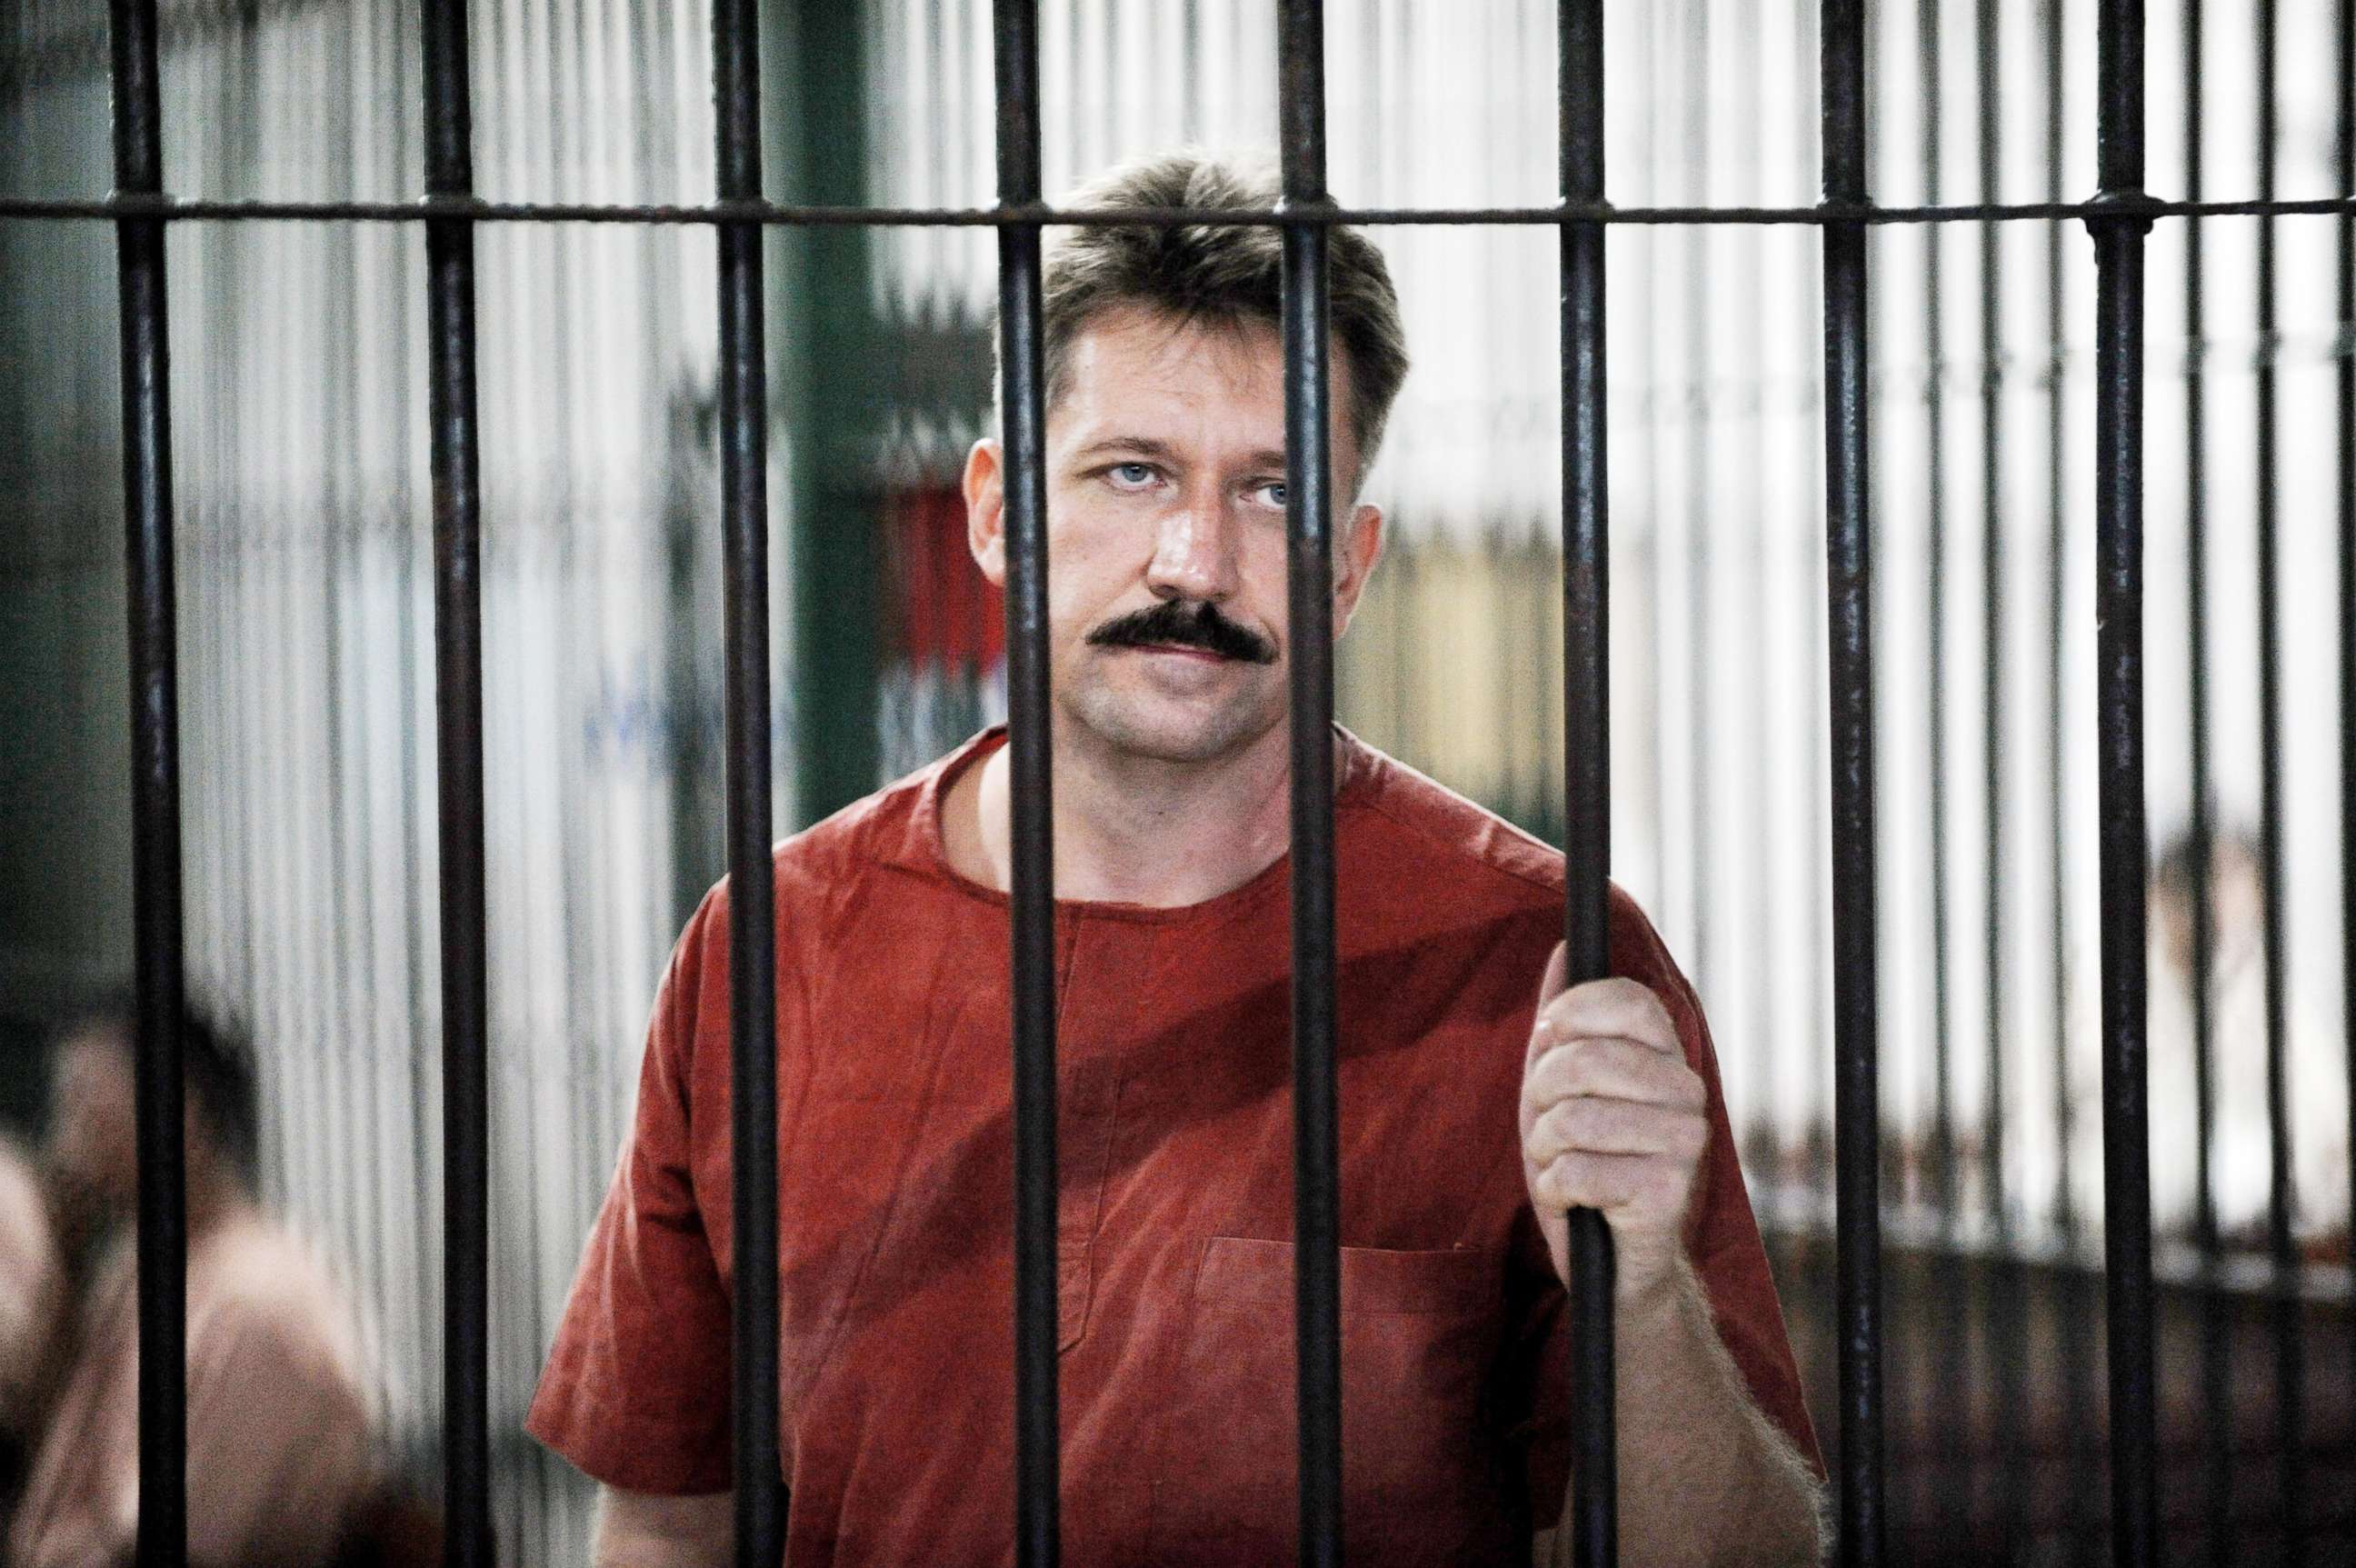 PHOTO: Viktor Bout looks from behind bars at the Criminal Court in Bangkok, Oct. 10, 2008.